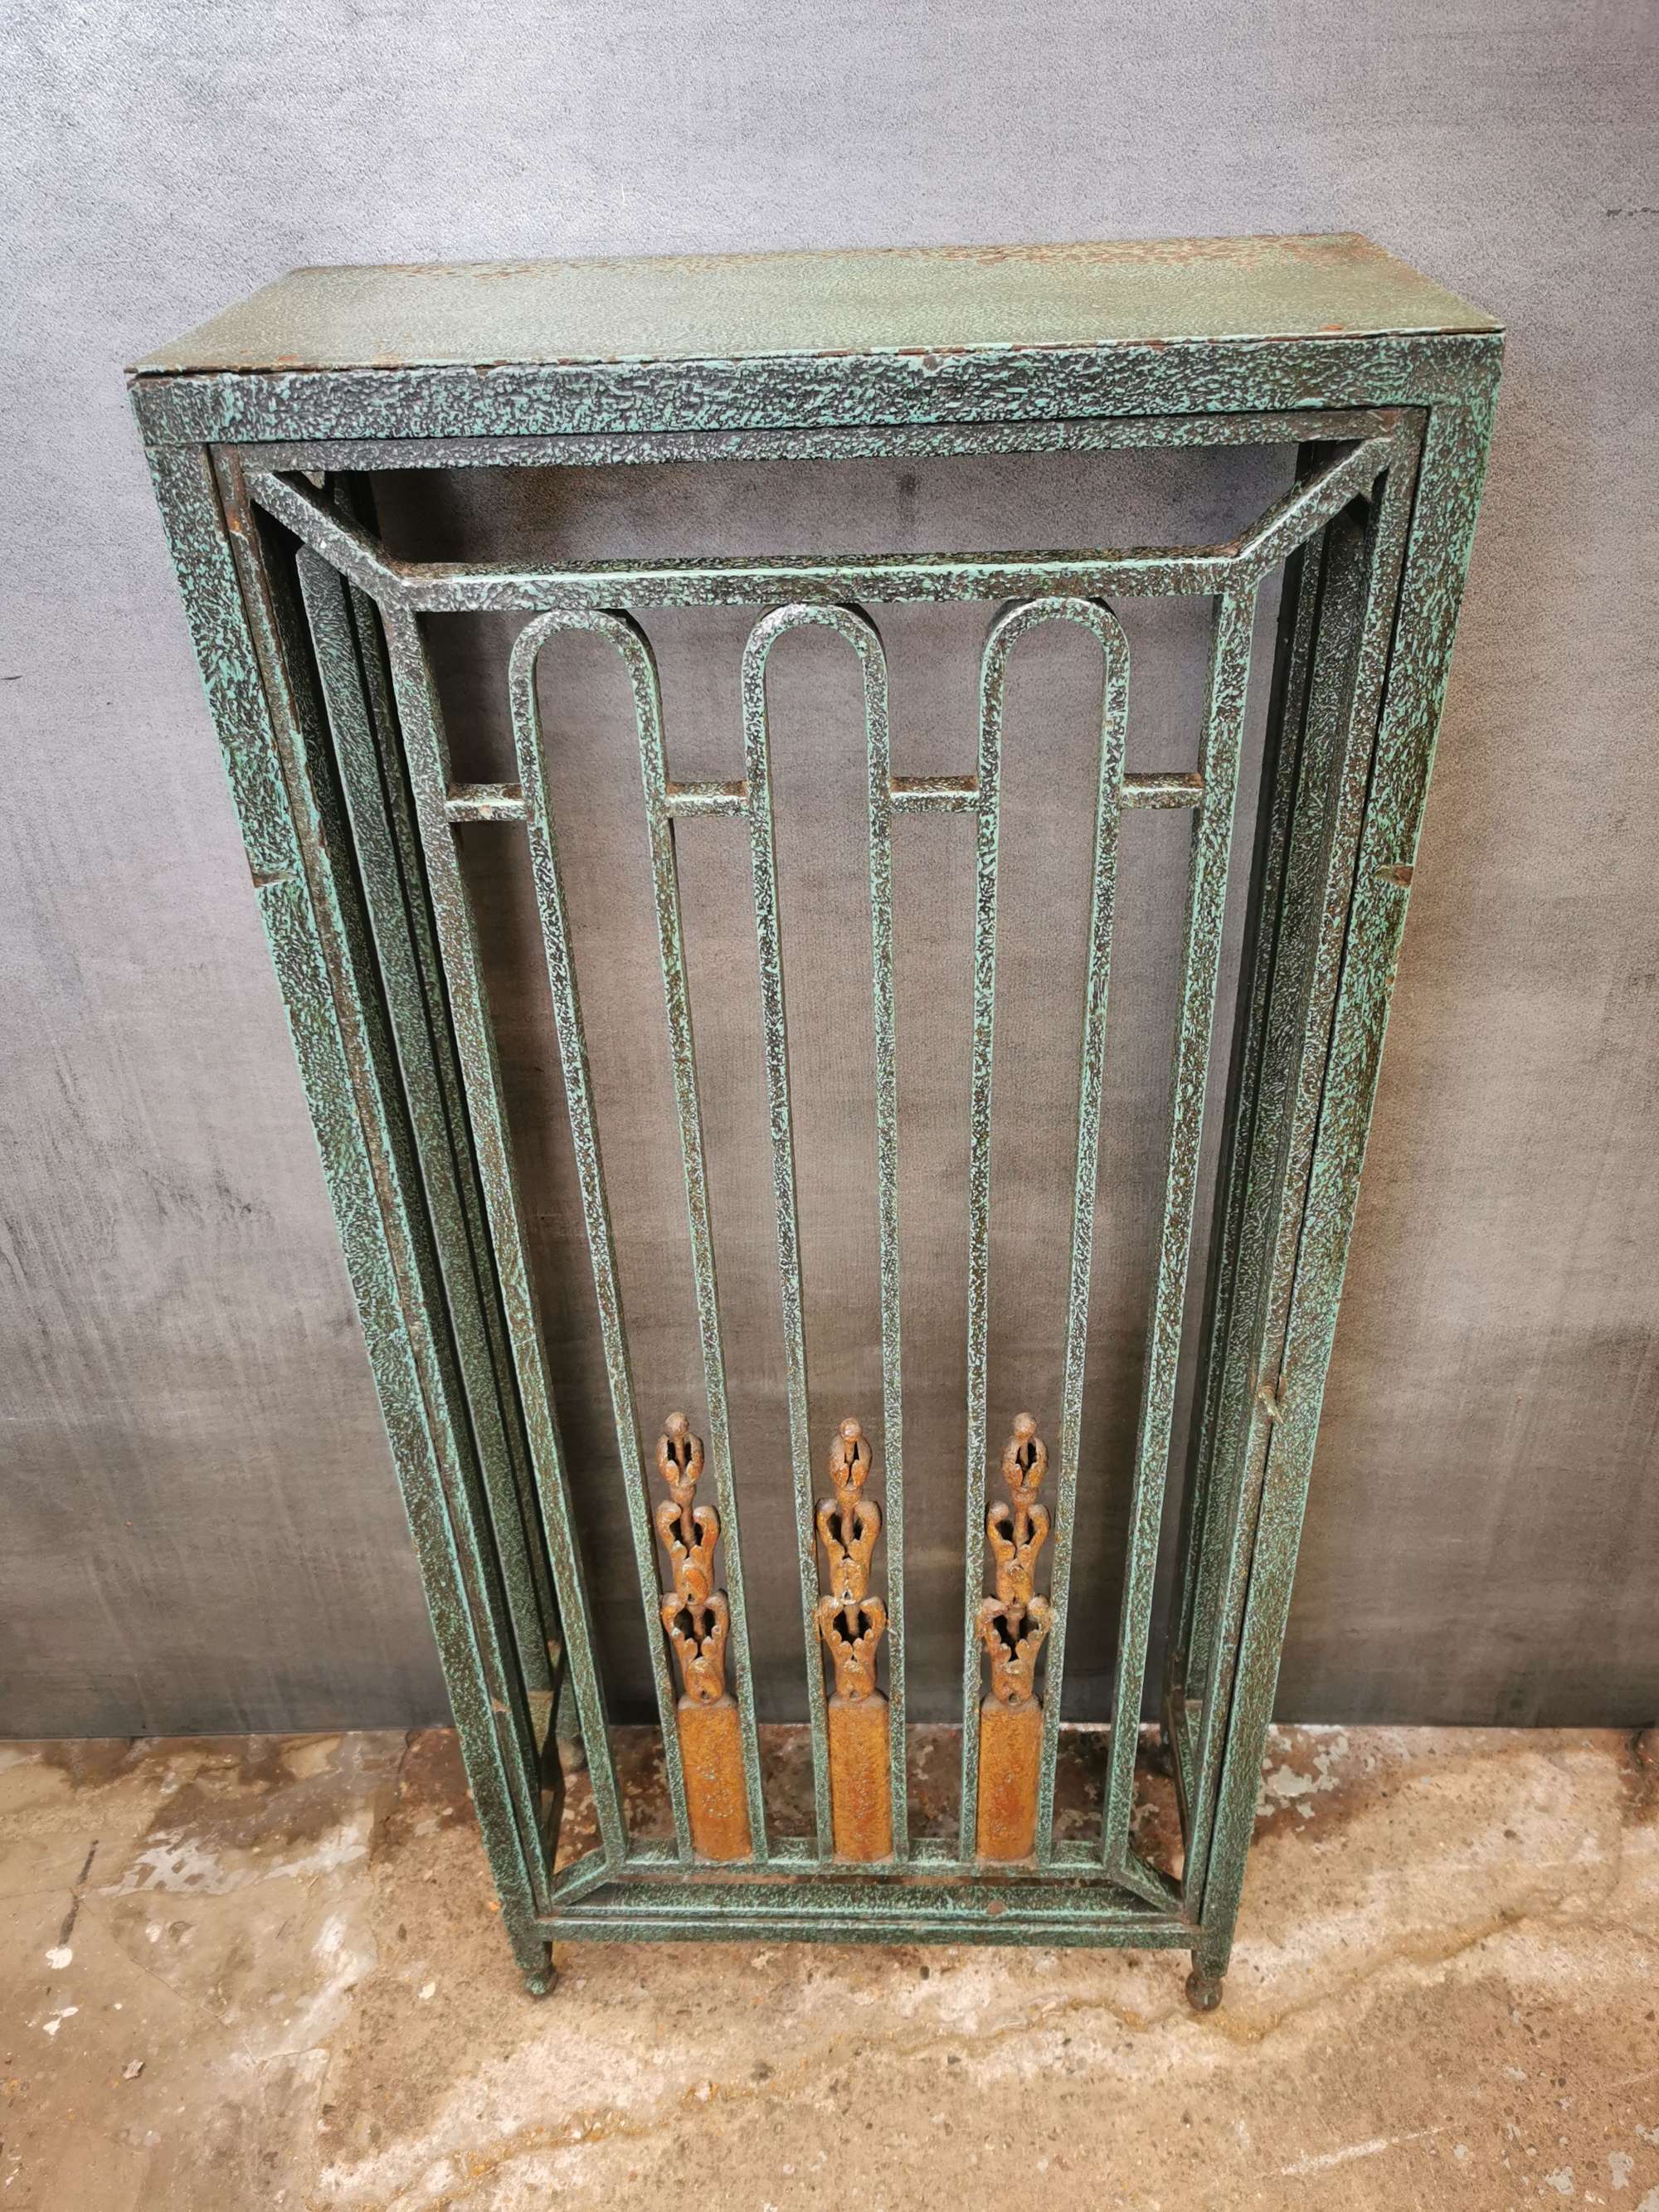 An early 20th century or late 19th green enamel painted radiator cover